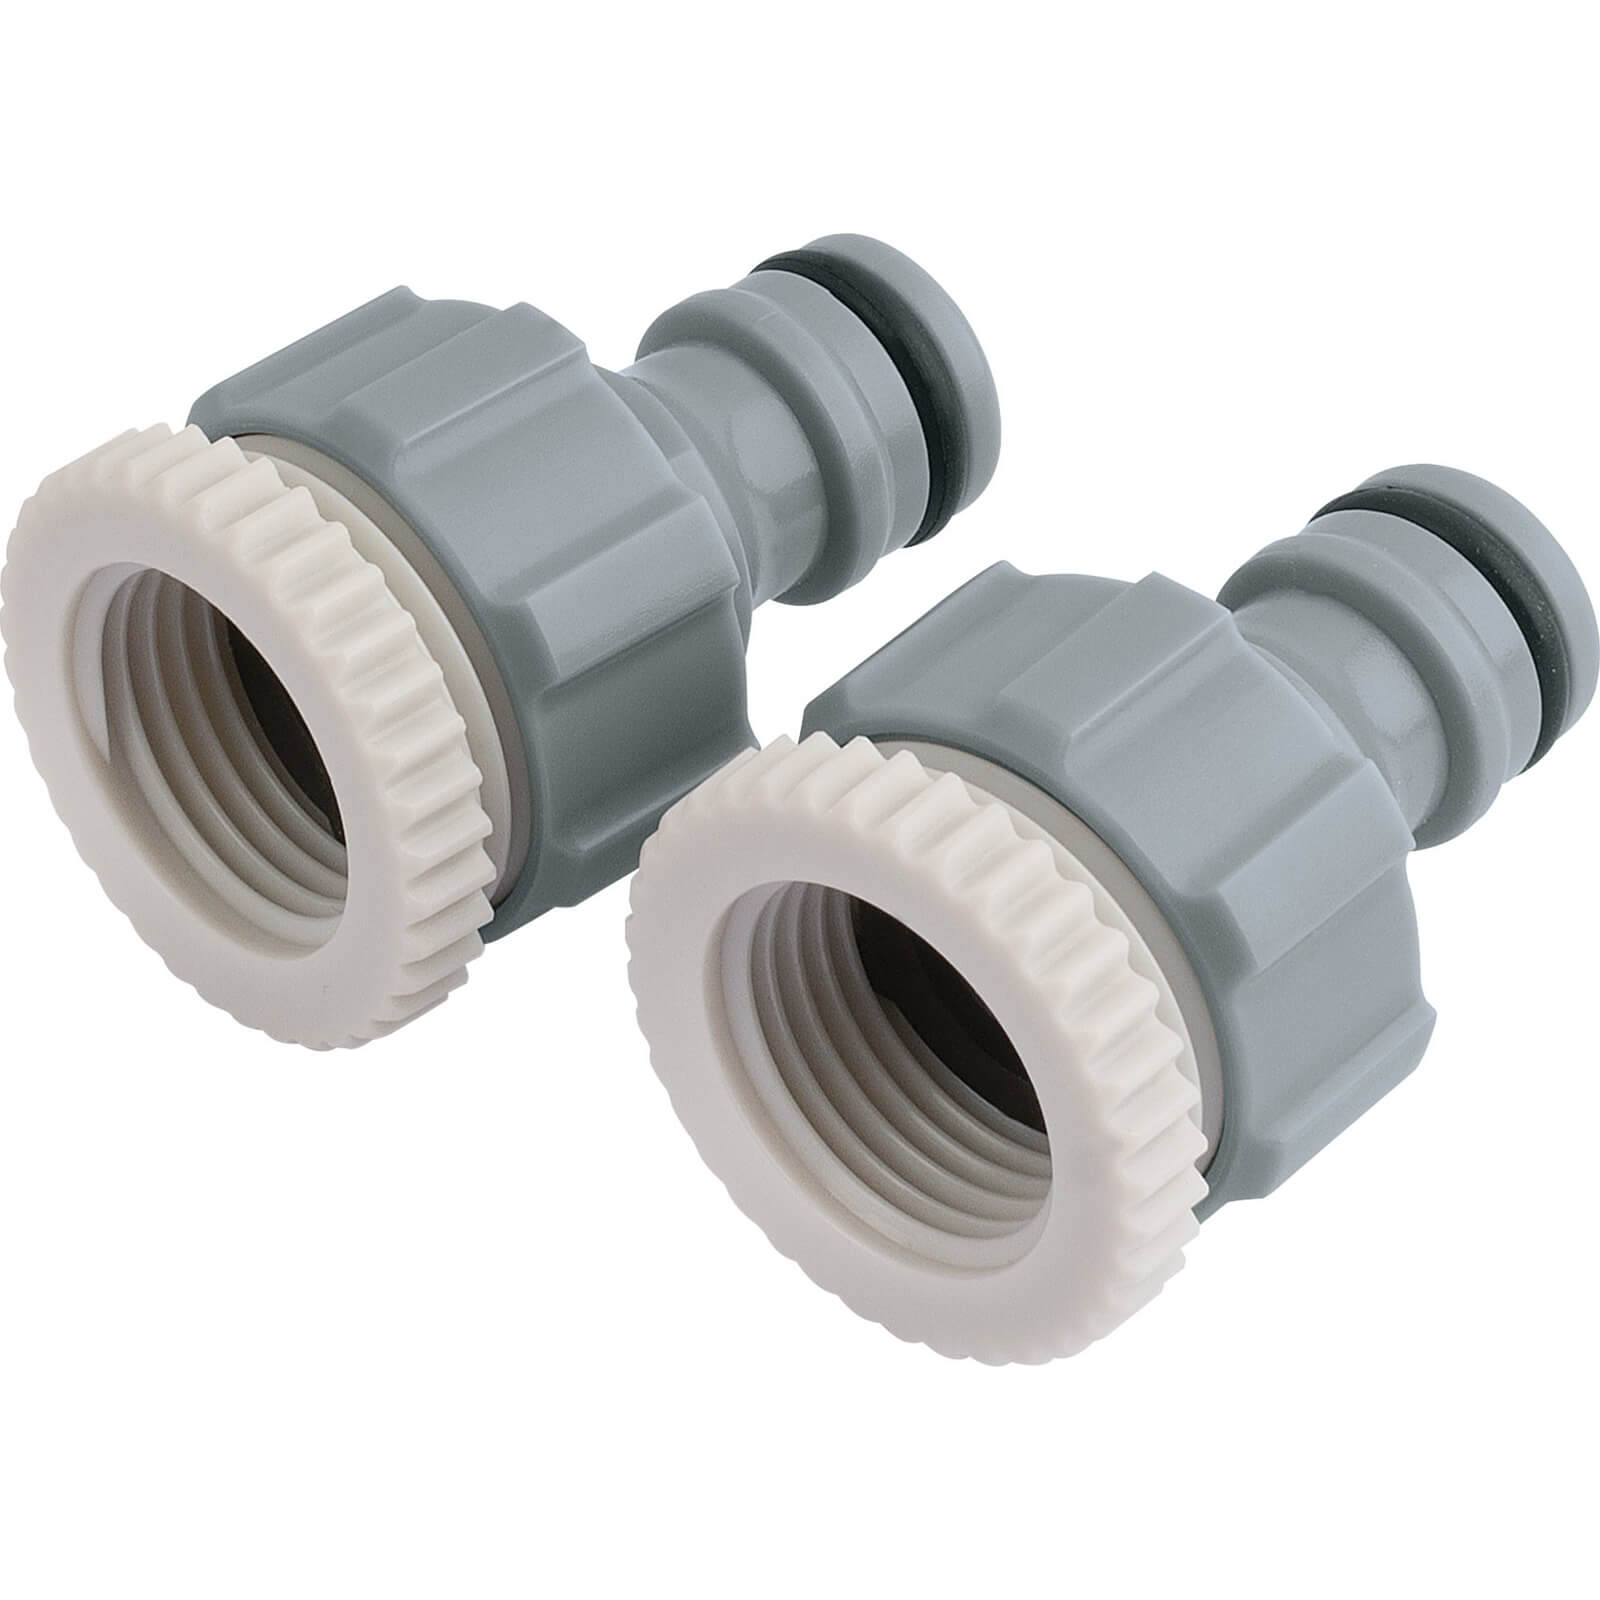 Image of Draper 2 Piece 1/2" and 3/4" BSP Tap Connector Set